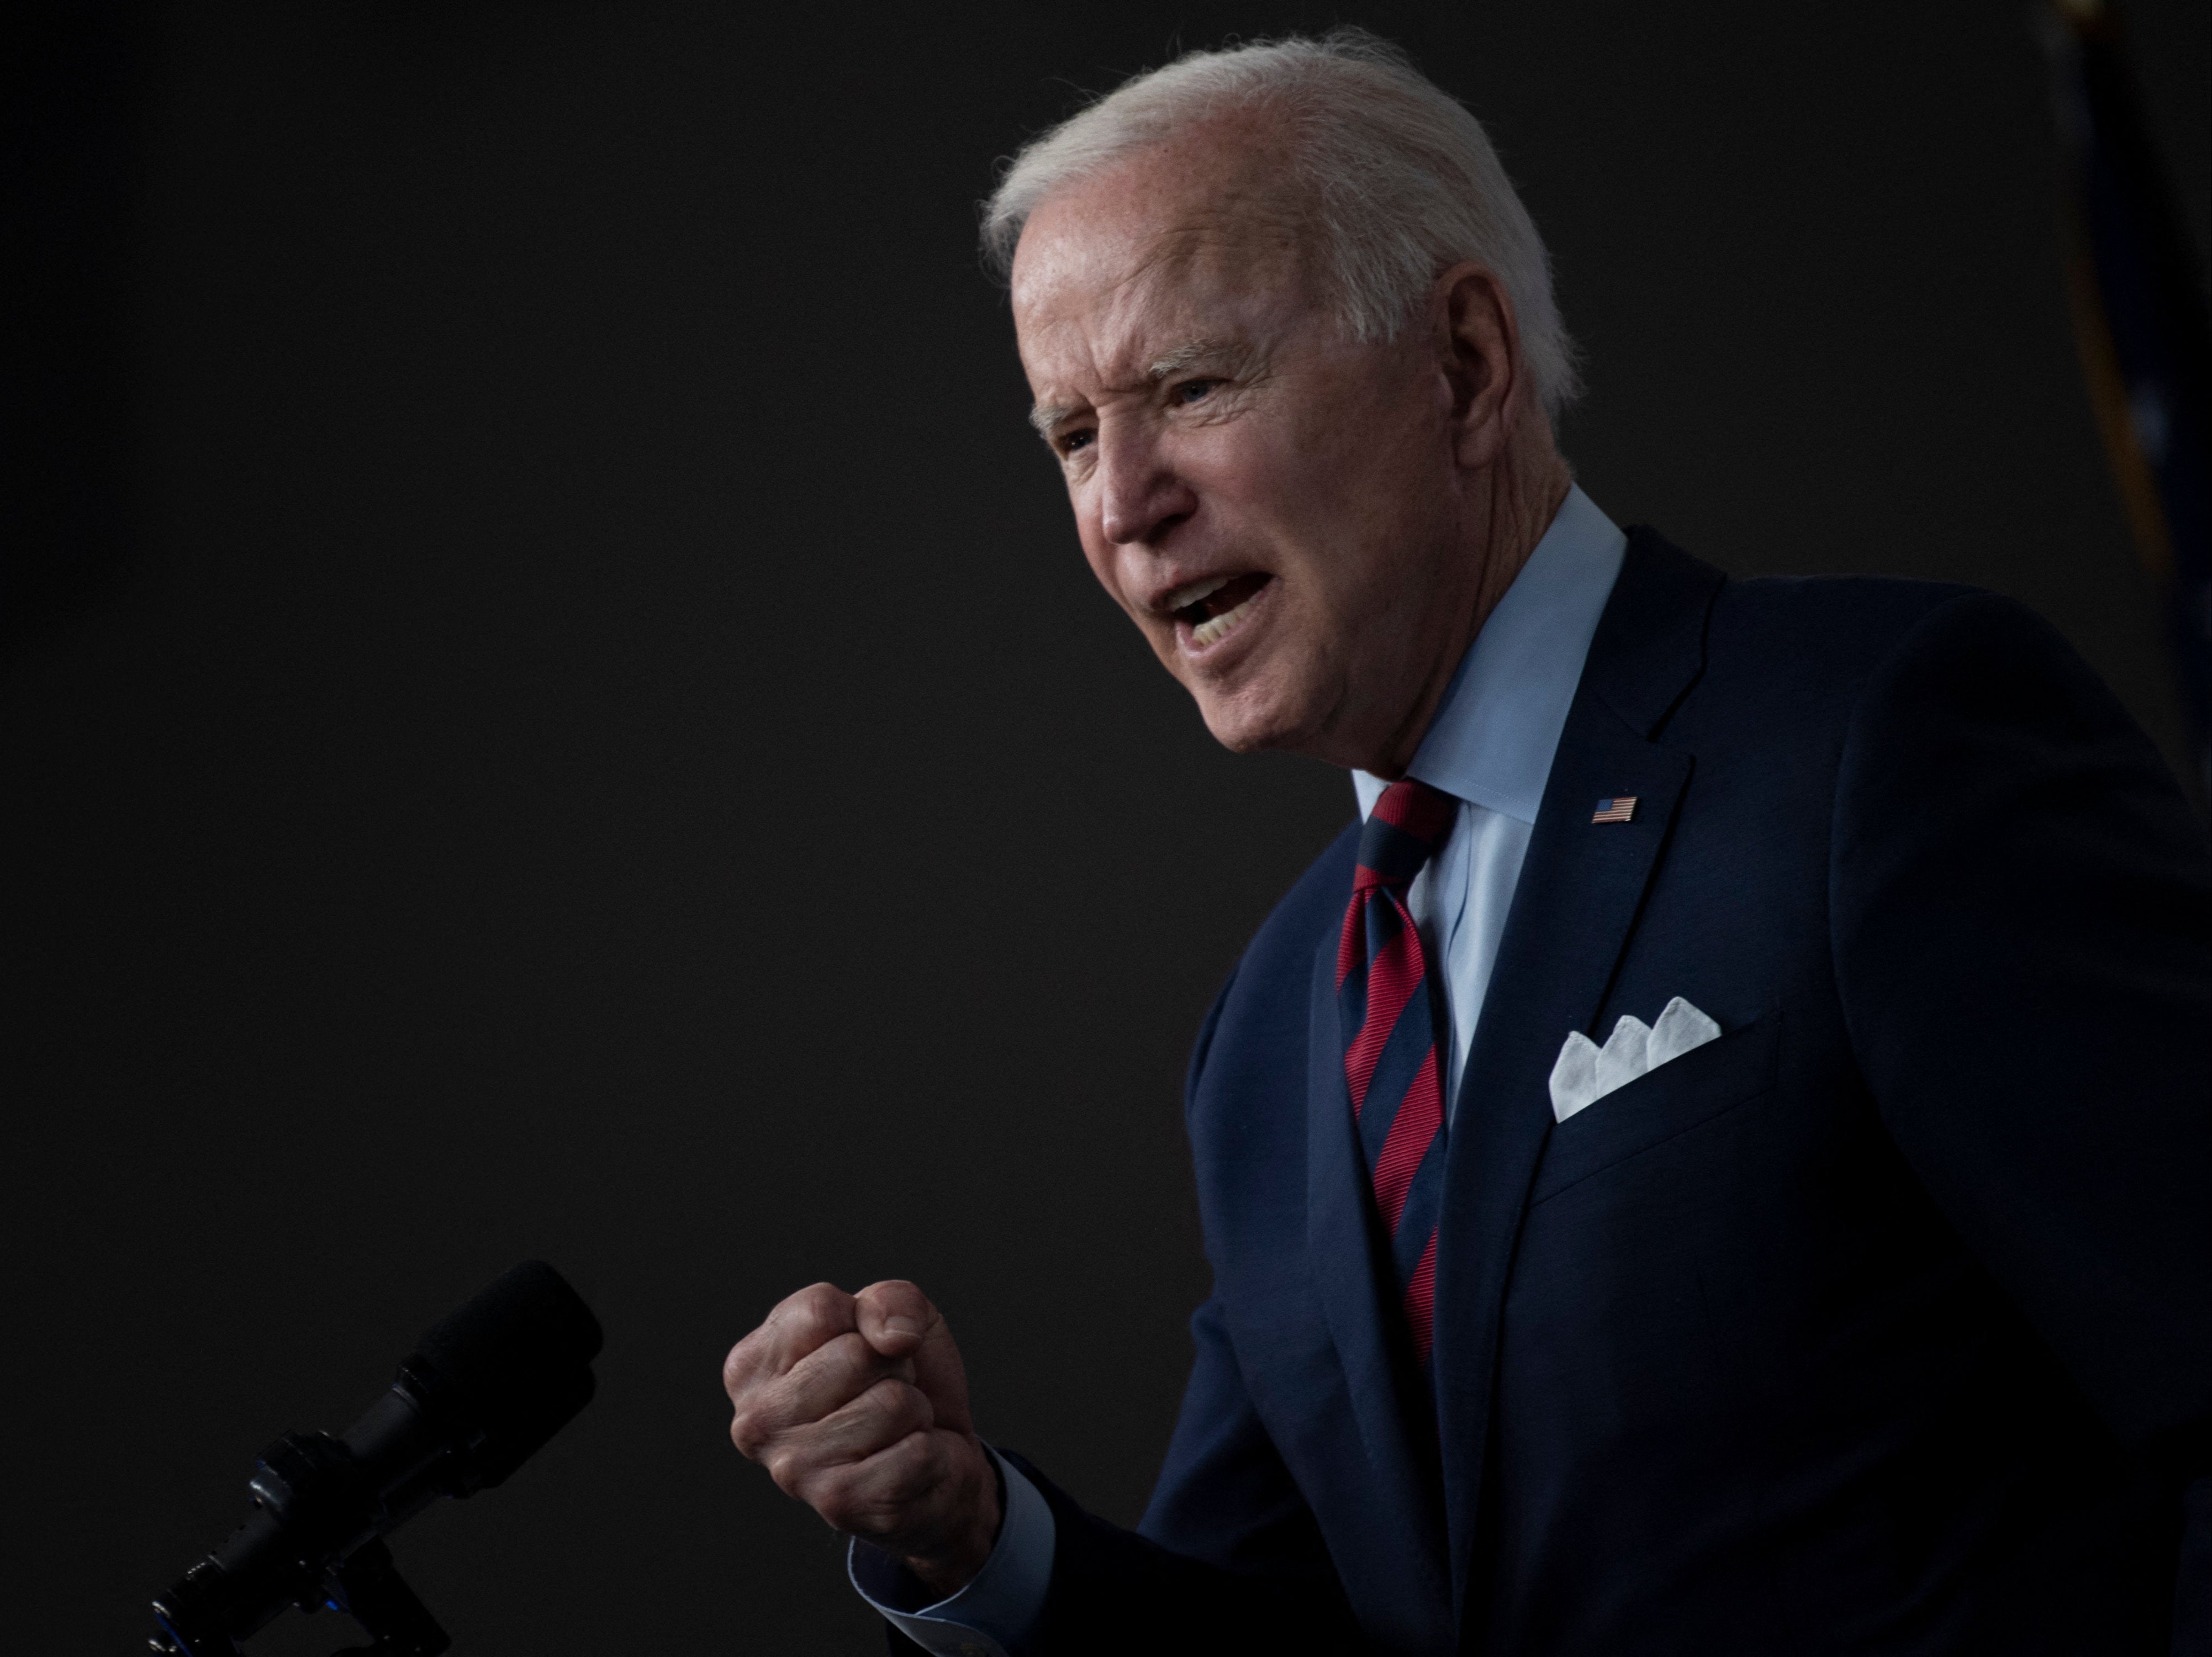 Joe Biden is putting consumer nations first with global tax reform proposals